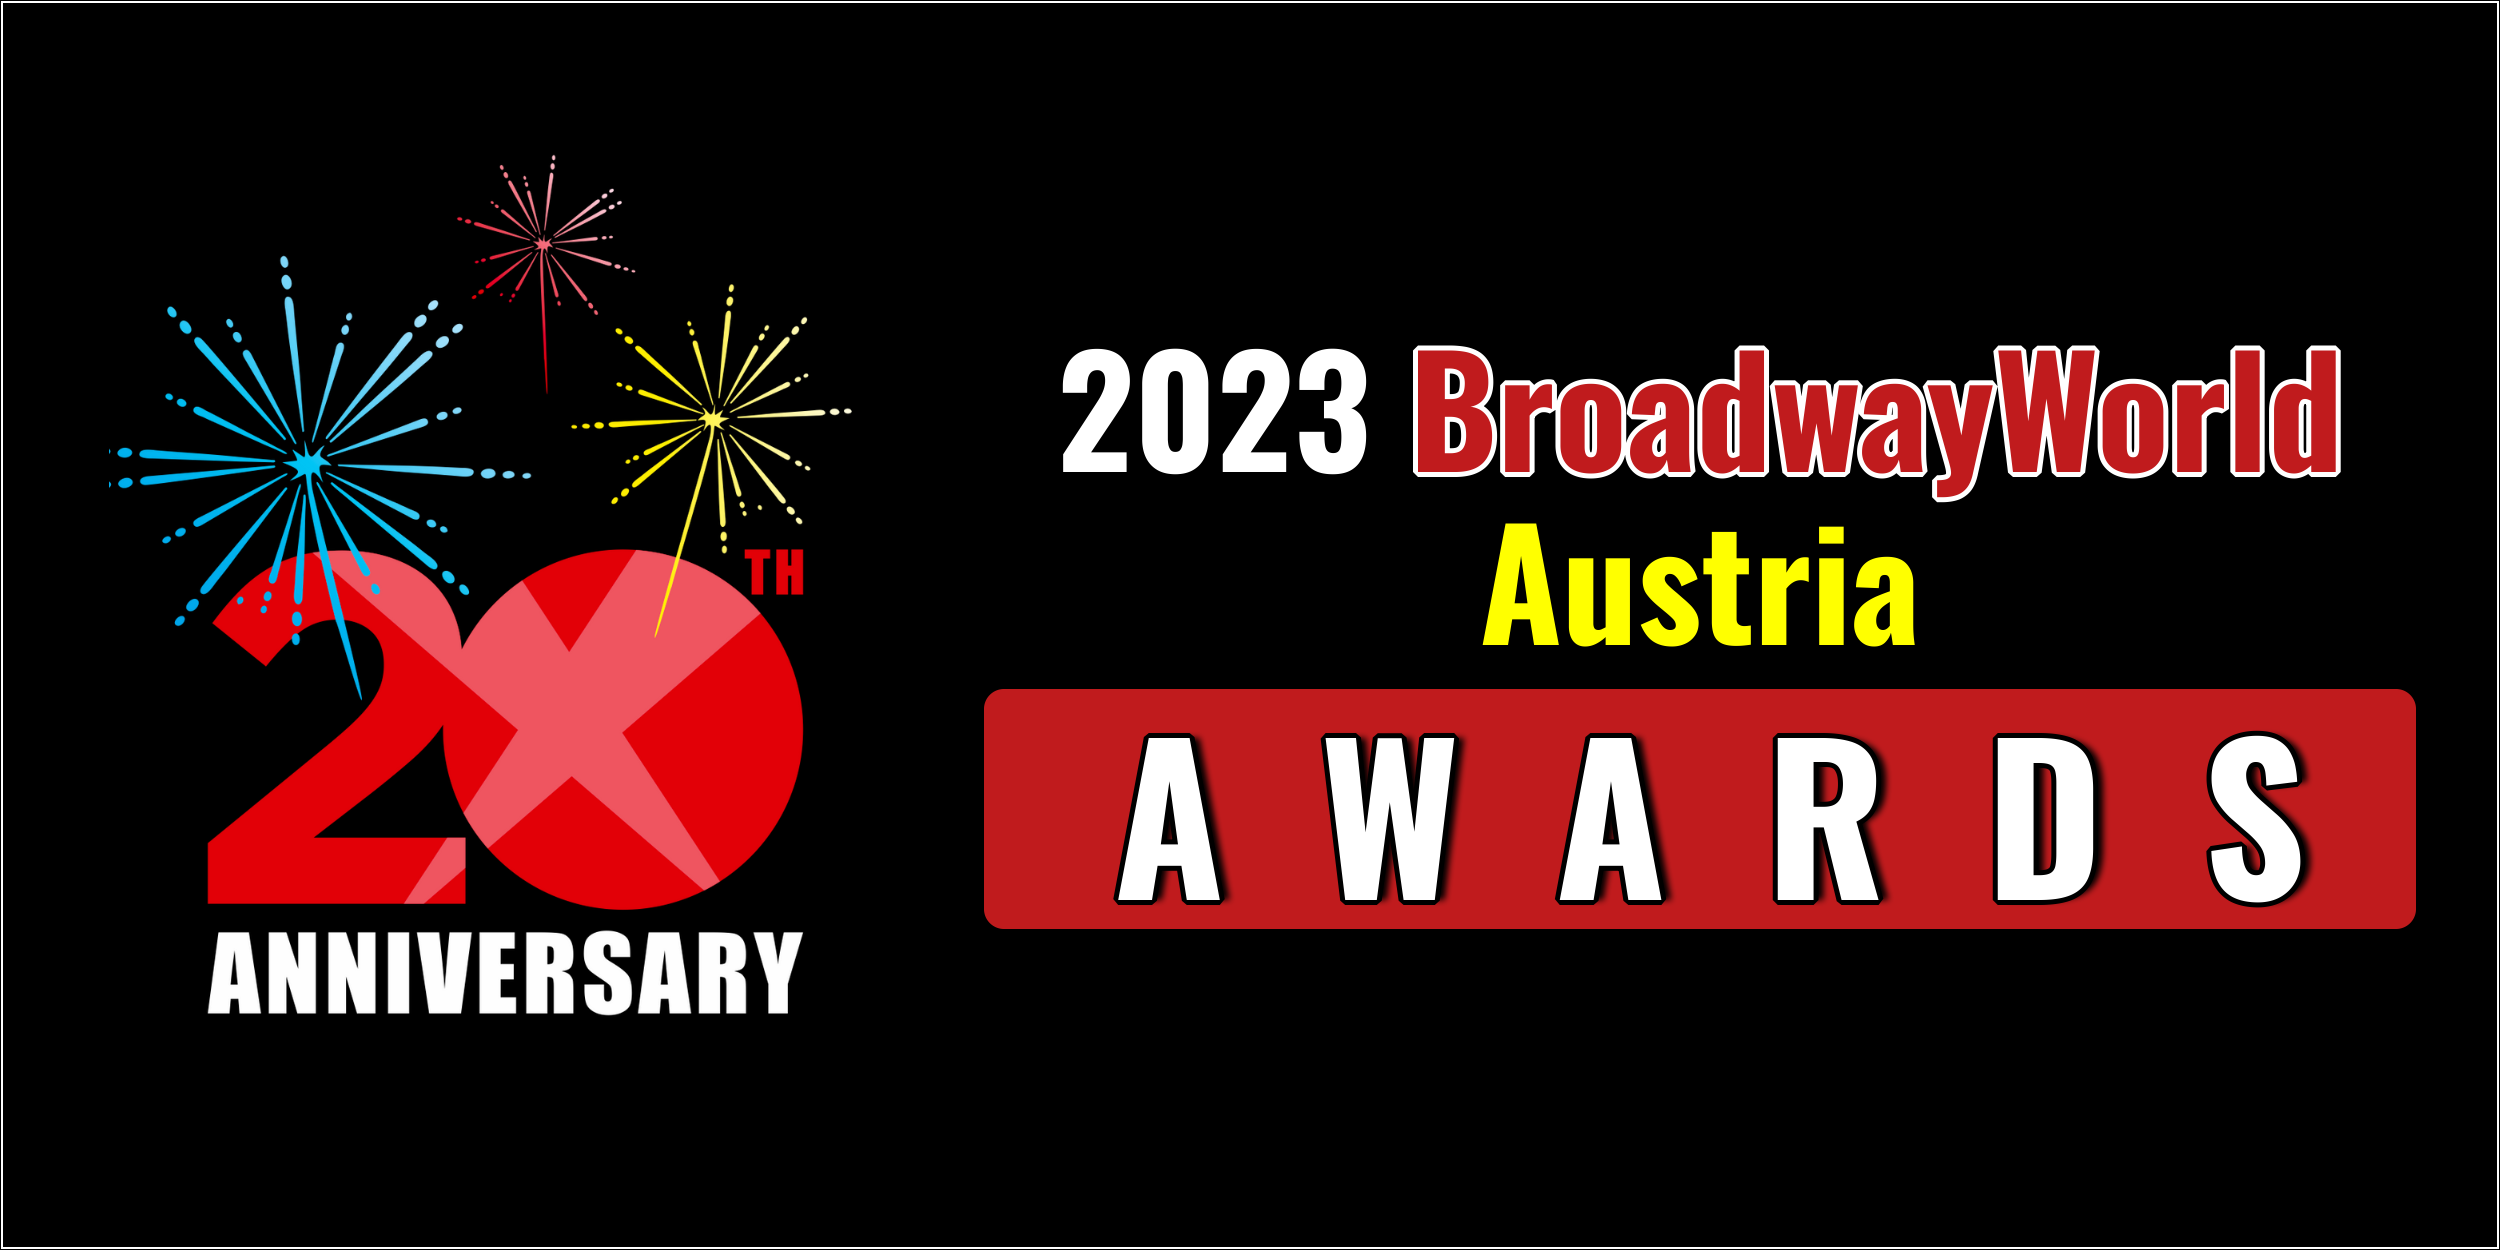 Latest Standings Announced For The 2023 BroadwayWorld Austria Awards; ROCK ME AMADEUS Leads Best Musical! 